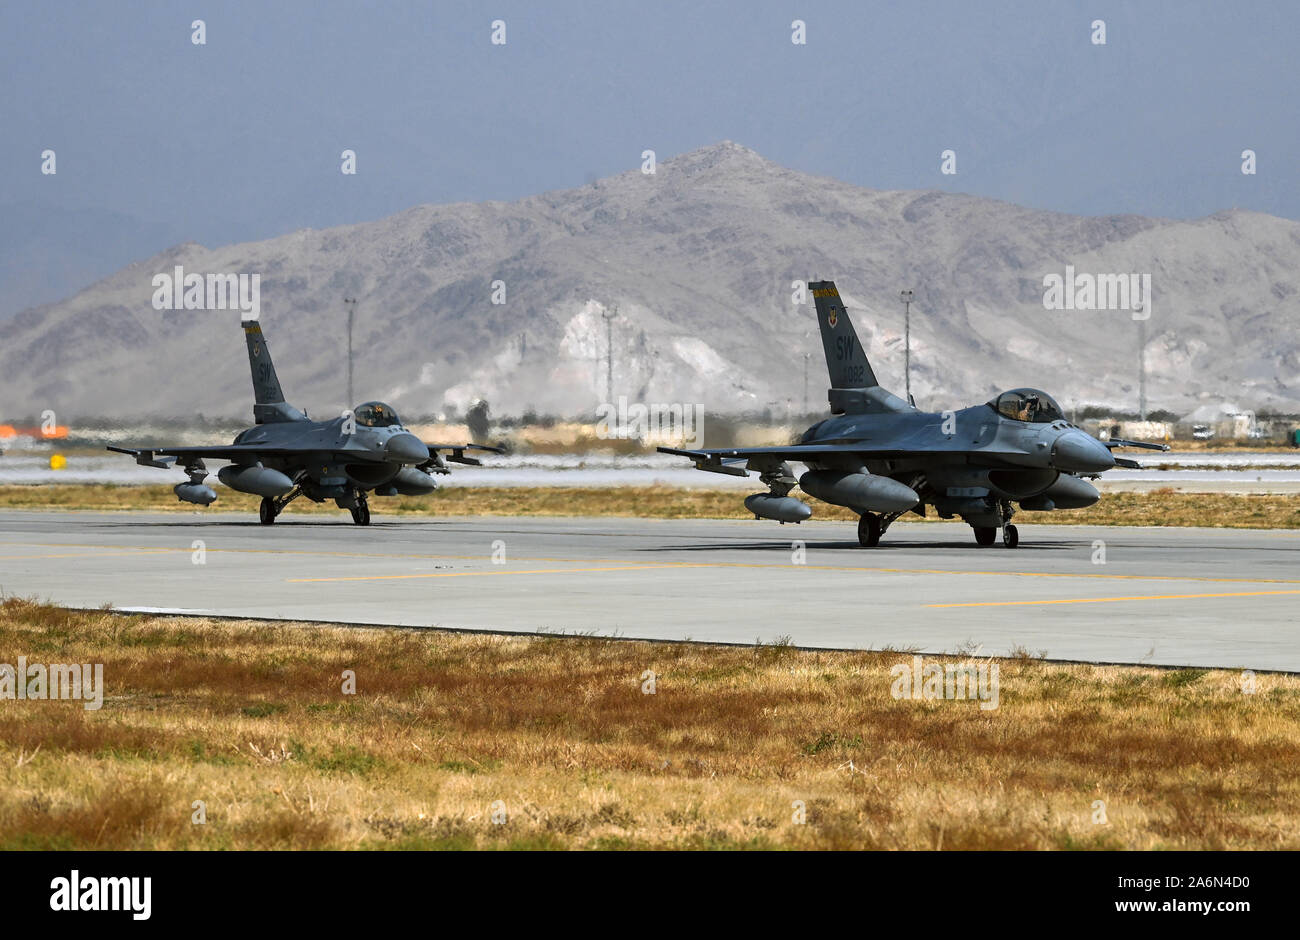 U.S. Air Force F-16 Fighting Falcons from the 79th Fighter Squadron at Shaw Air Force Base, S.C., arrive at Bagram Airfield, Afghanistan, Oct. 26, 2019. While assigned to the 455th Air Expeditionary Wing at Bagram, the F-16s will help provide decisive airpower through the U.S. Central Command area of responsibility. The airpower the wing provides ensures NATO forces can focus on their mission to train, advise and assist. (U.S. Air Force photo by Staff Sgt. Matthew Lotz) Stock Photo